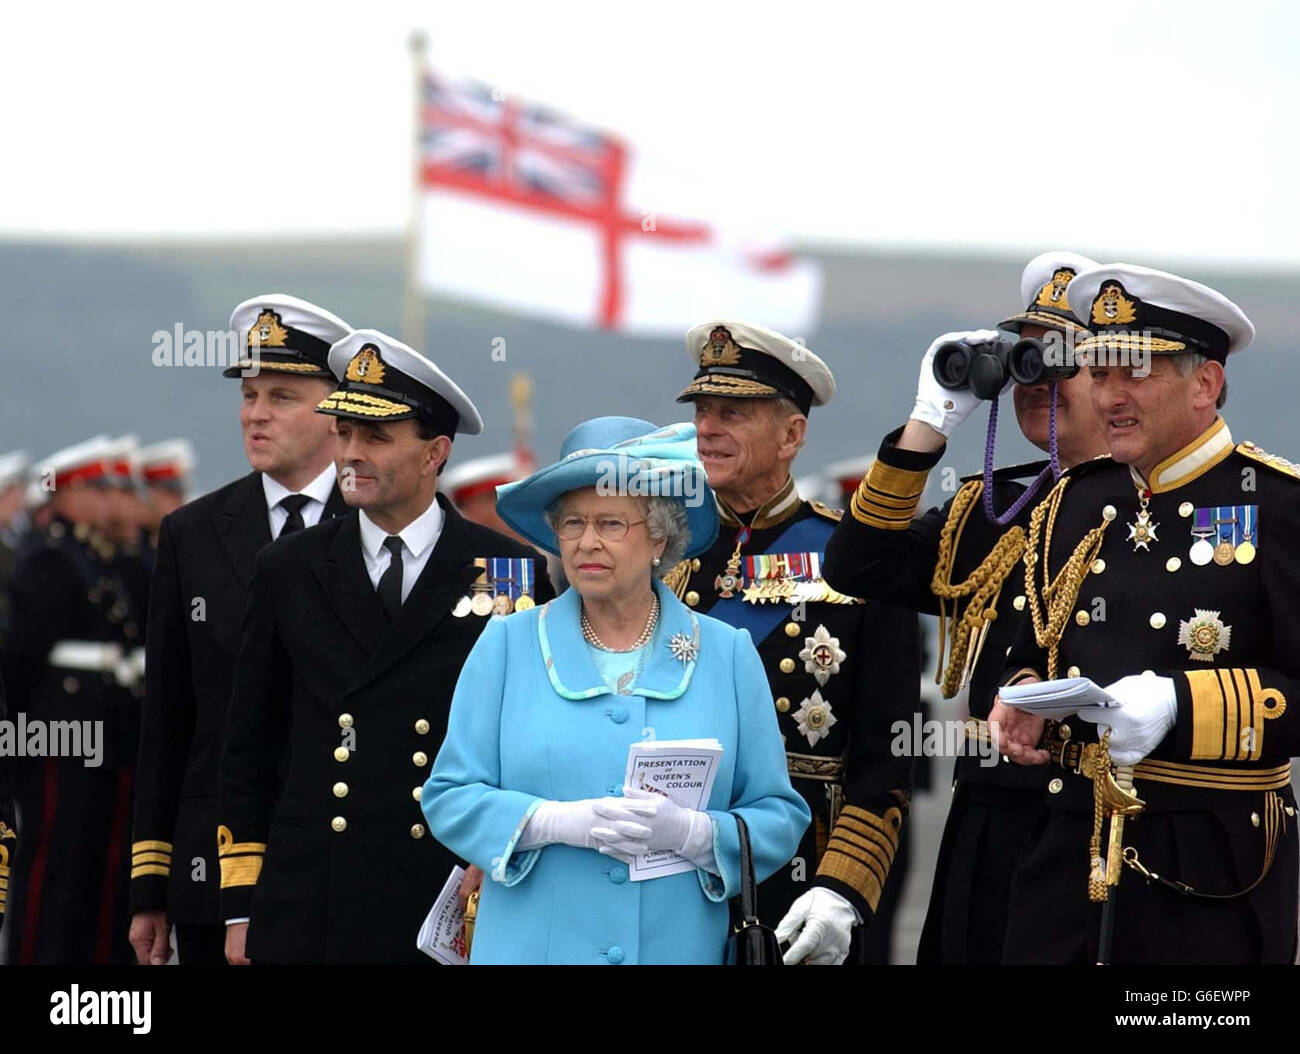 Queen Elizabeth II with the Duke of Edinburgh and high ranking officers on board HMS Ocean to present new Colours in Plymouth Sound. Thousands of onlookers are expected to watch the historic event from land and nearby pleasure boats. * To mark the occasion 18 Royal Navy ships are to stage the biggest Fleet gathering in Plymouth waters for nearly a century. Stock Photo